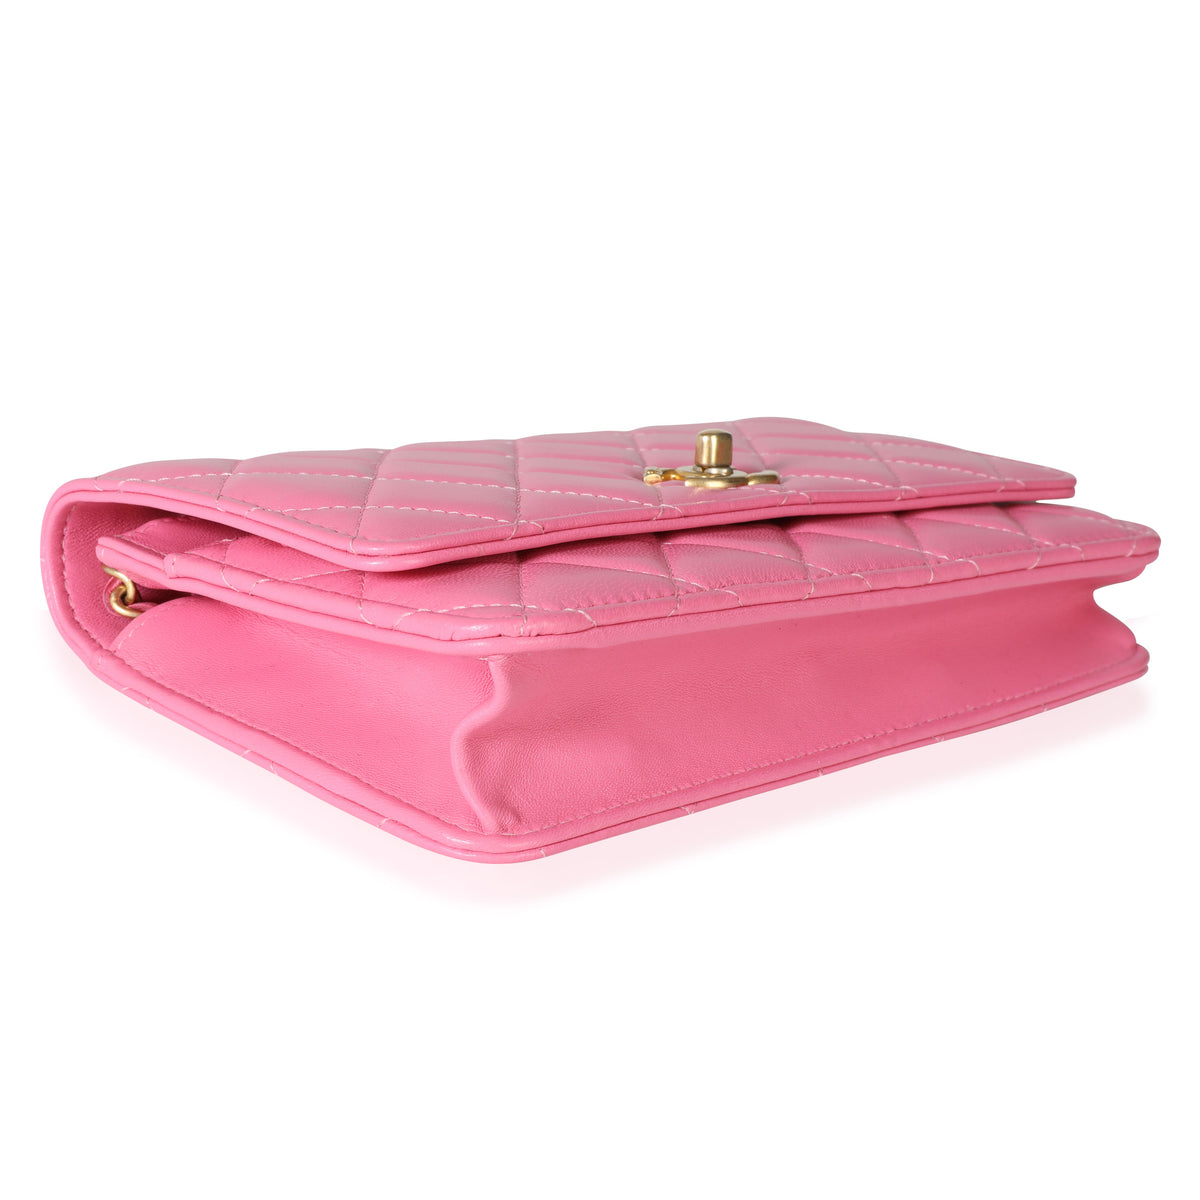 Chanel Pink Quilted Lambskin Pearl Crush Wallet on Chain